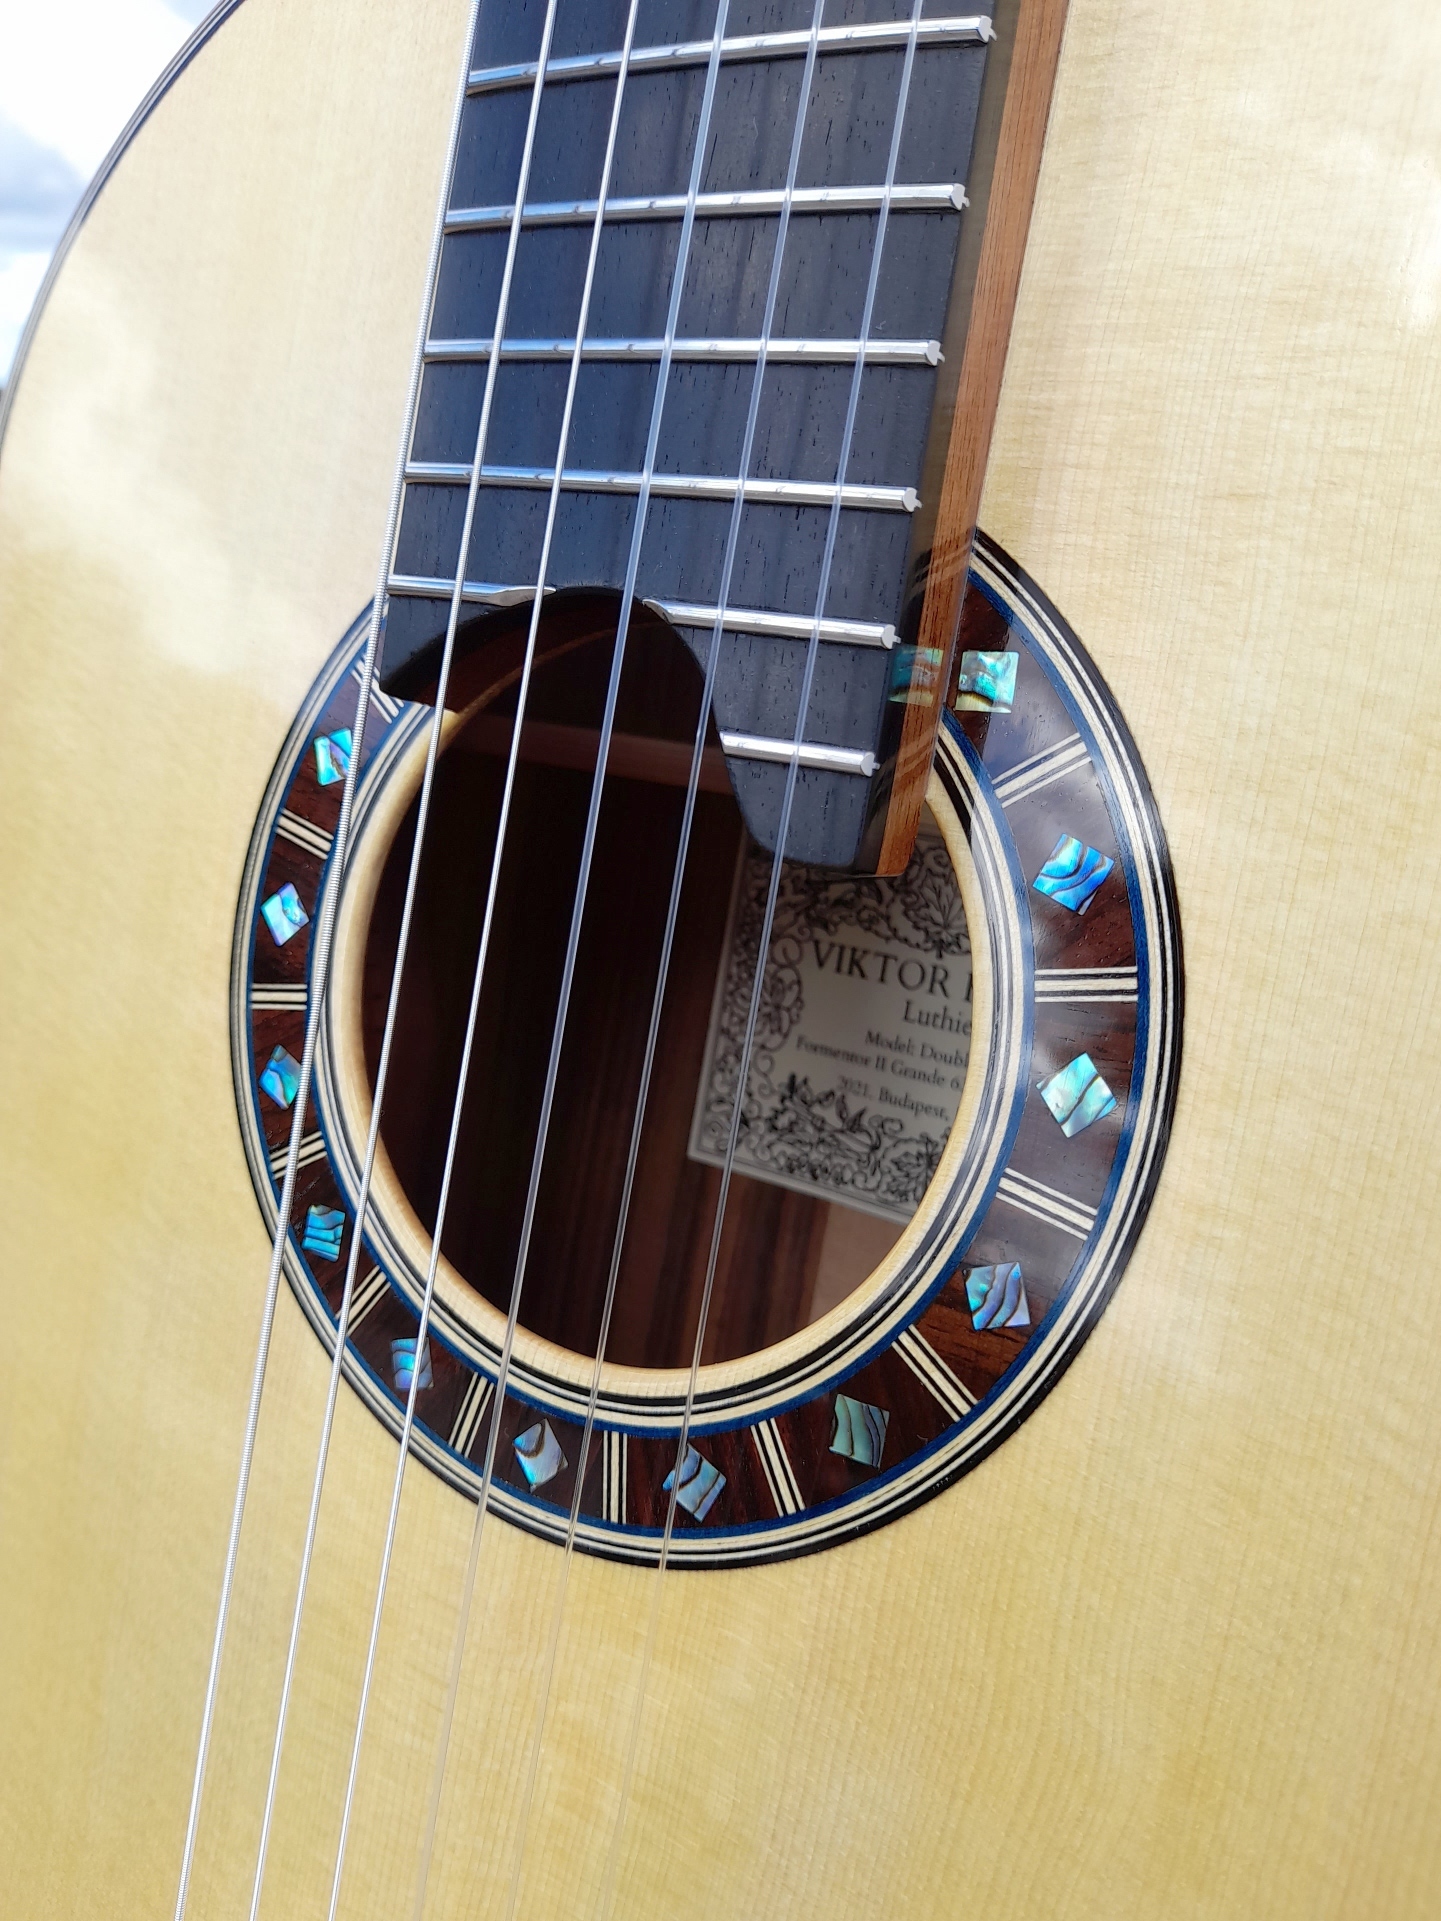 elevated doubletop classical guitar